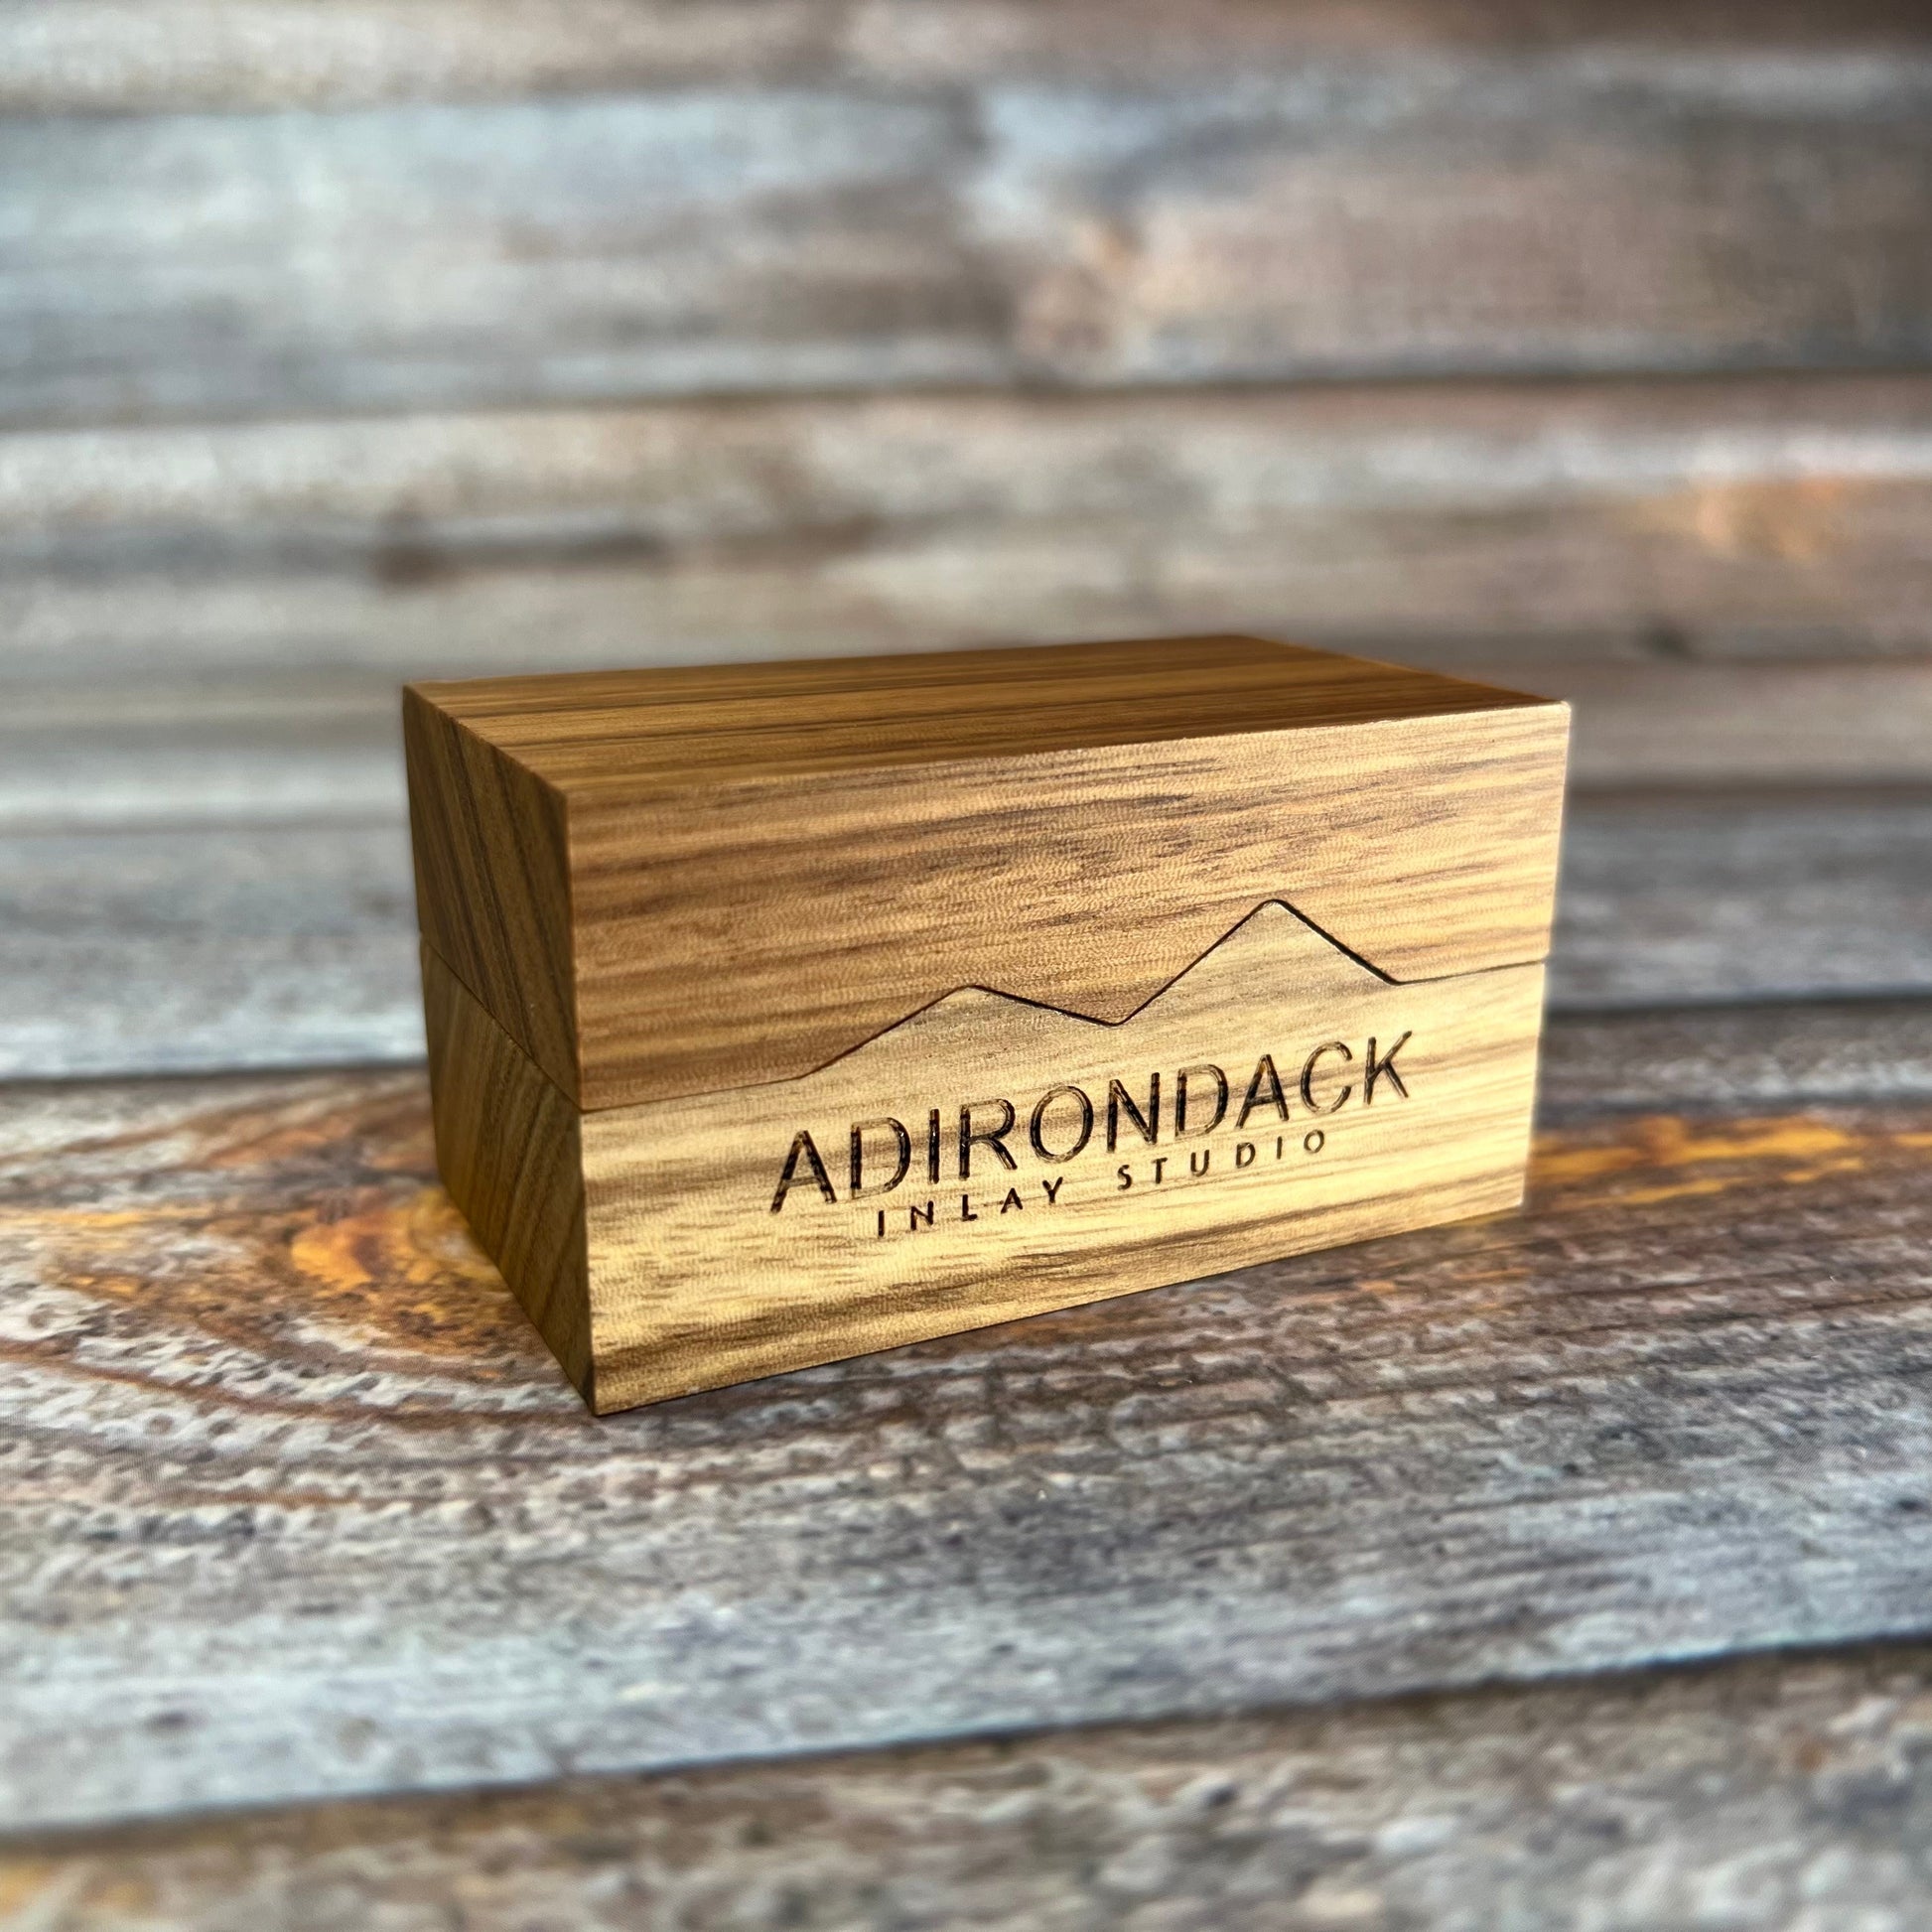 Size Exchanges After 6 months - Premium Custom Engraving from Adirondack Inlay Studio LLC - Just $29! Shop now at Adirondack Inlay Studio LLC